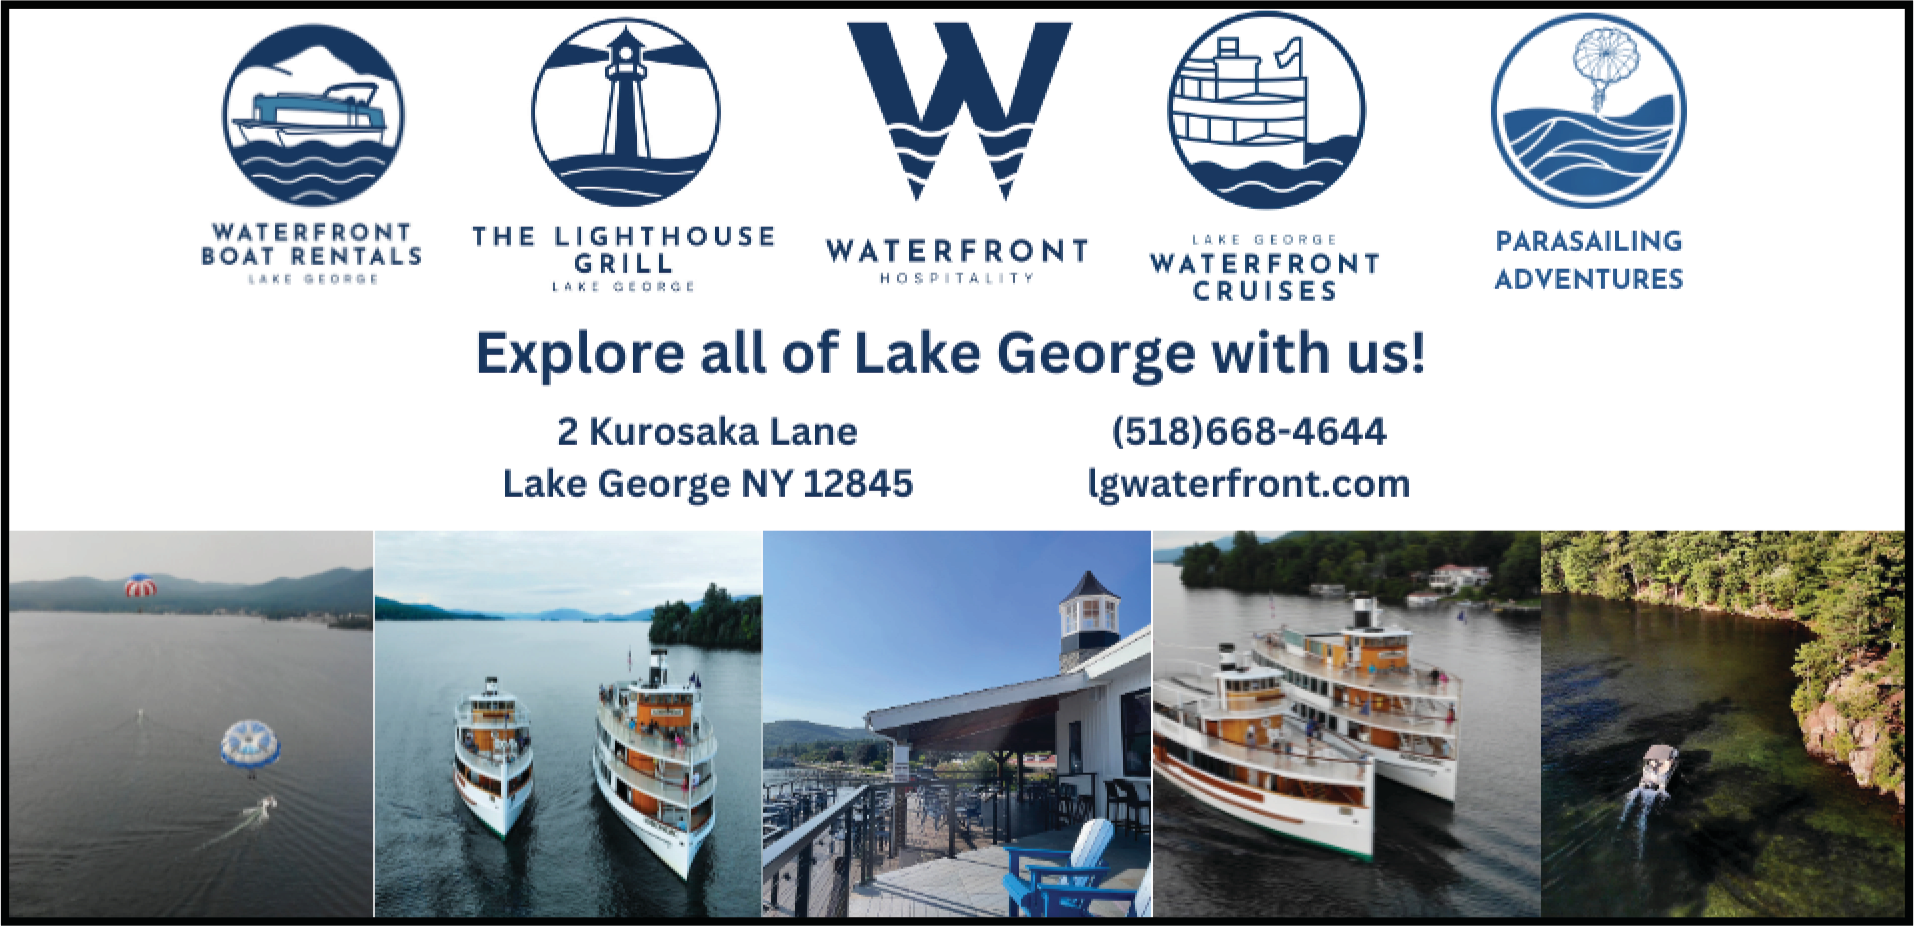 Waterfront Hospitality Print Ad